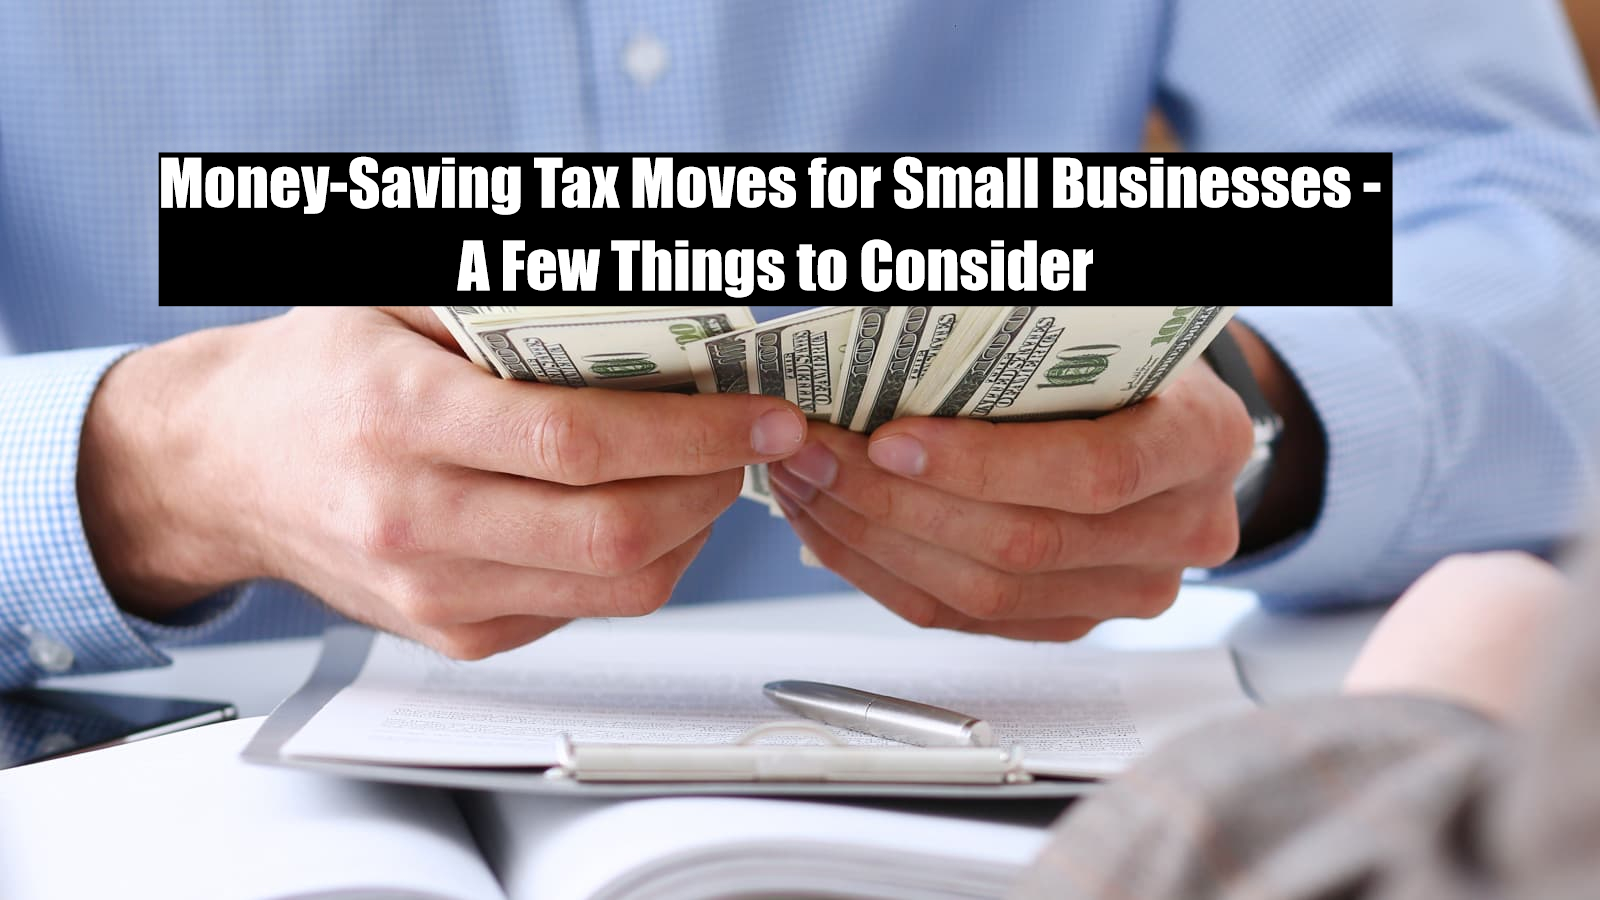 Scottsdale CPA & Accounting Firm Blog: Money-Saving Tax Moves for Small Businesses – A Few Things to Consider